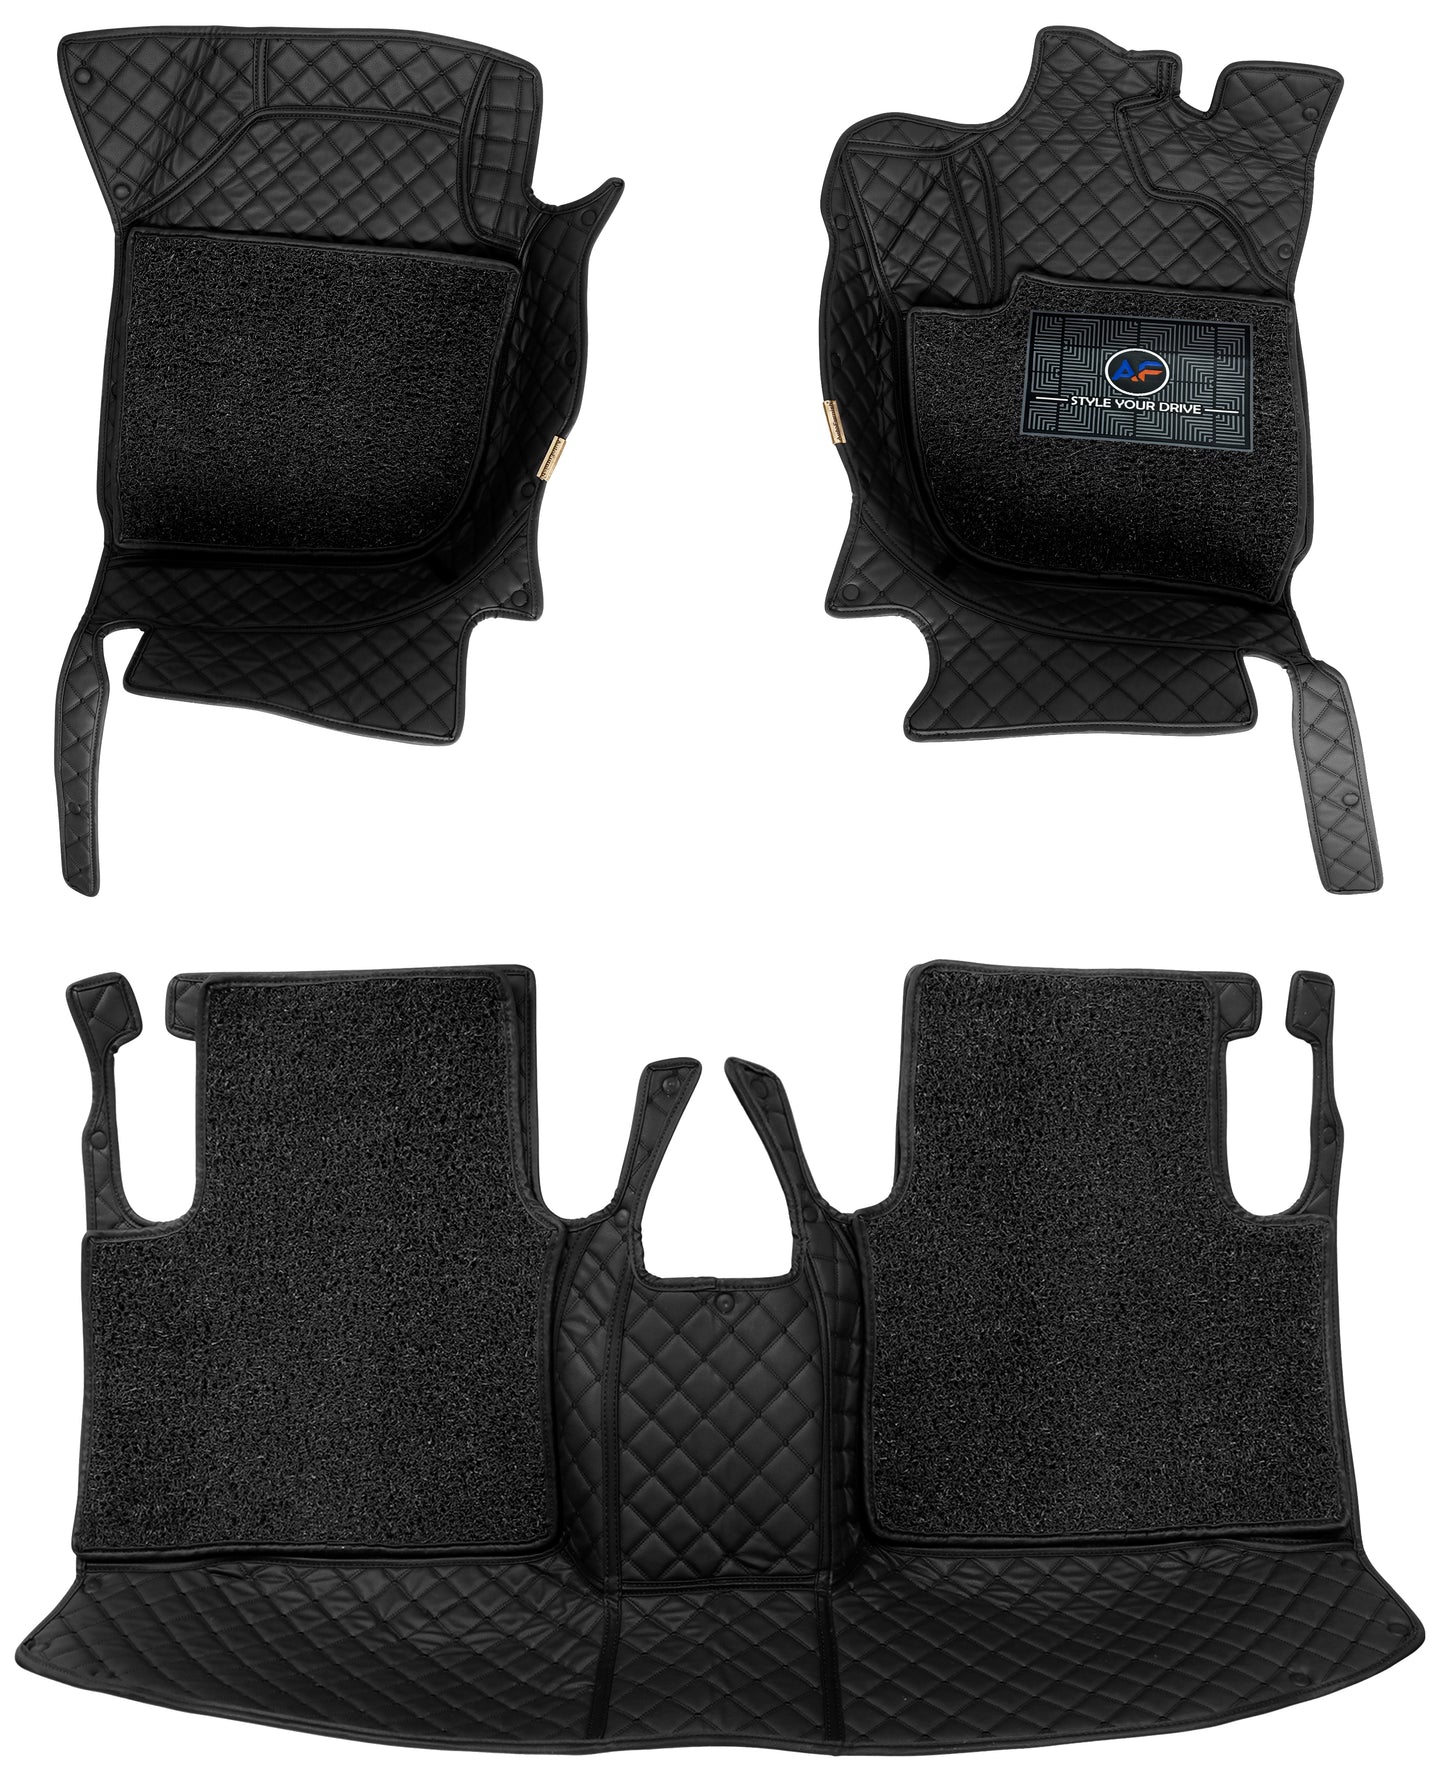 7d-luxury-car-footmats-for-Toyota-innova-crysta (2016-20)-custom-designed-pu-leather-with-7-layer-depth-24mm-3-rows